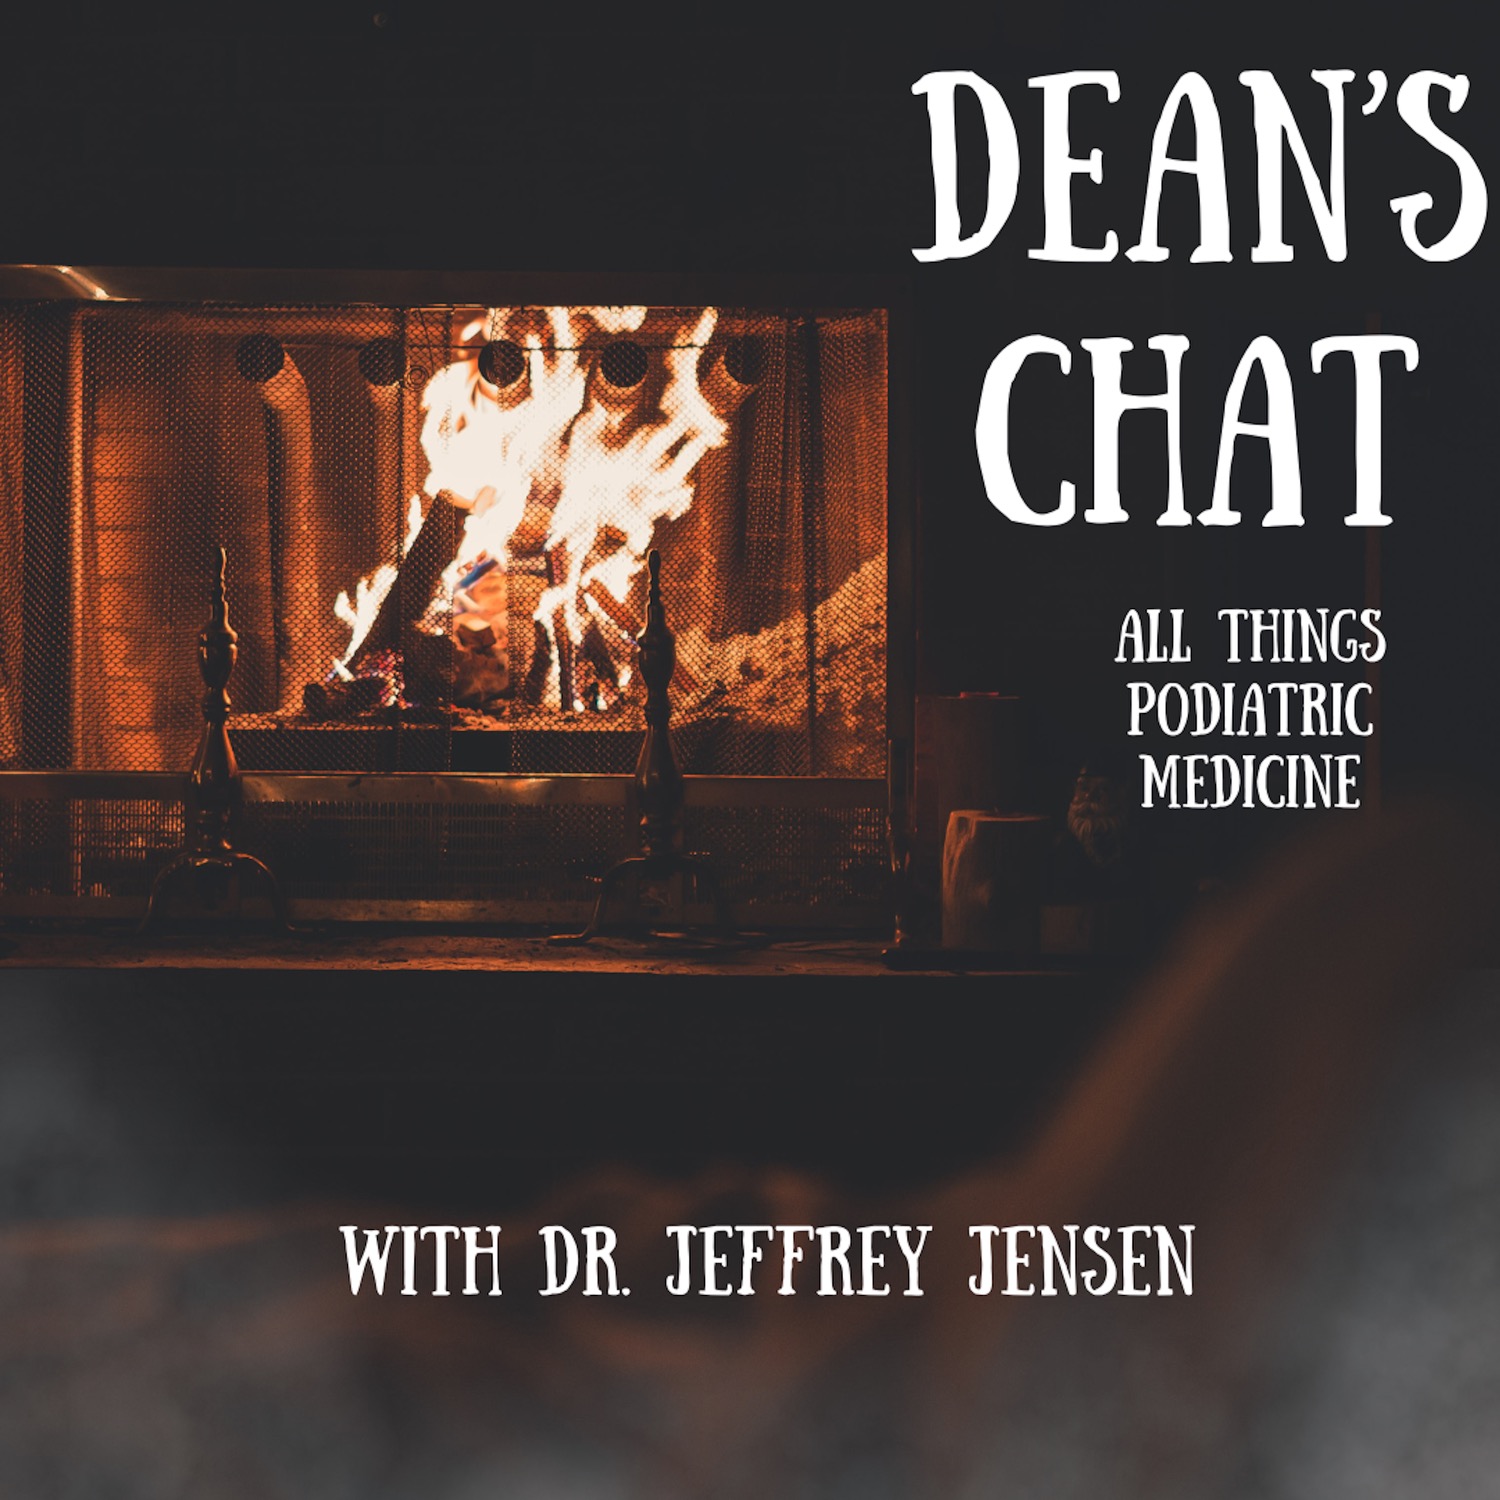 The “Dean’s Chat – All Things Podiatric Medicine” podcast is hosted by Dr. Jeffrey Jensen